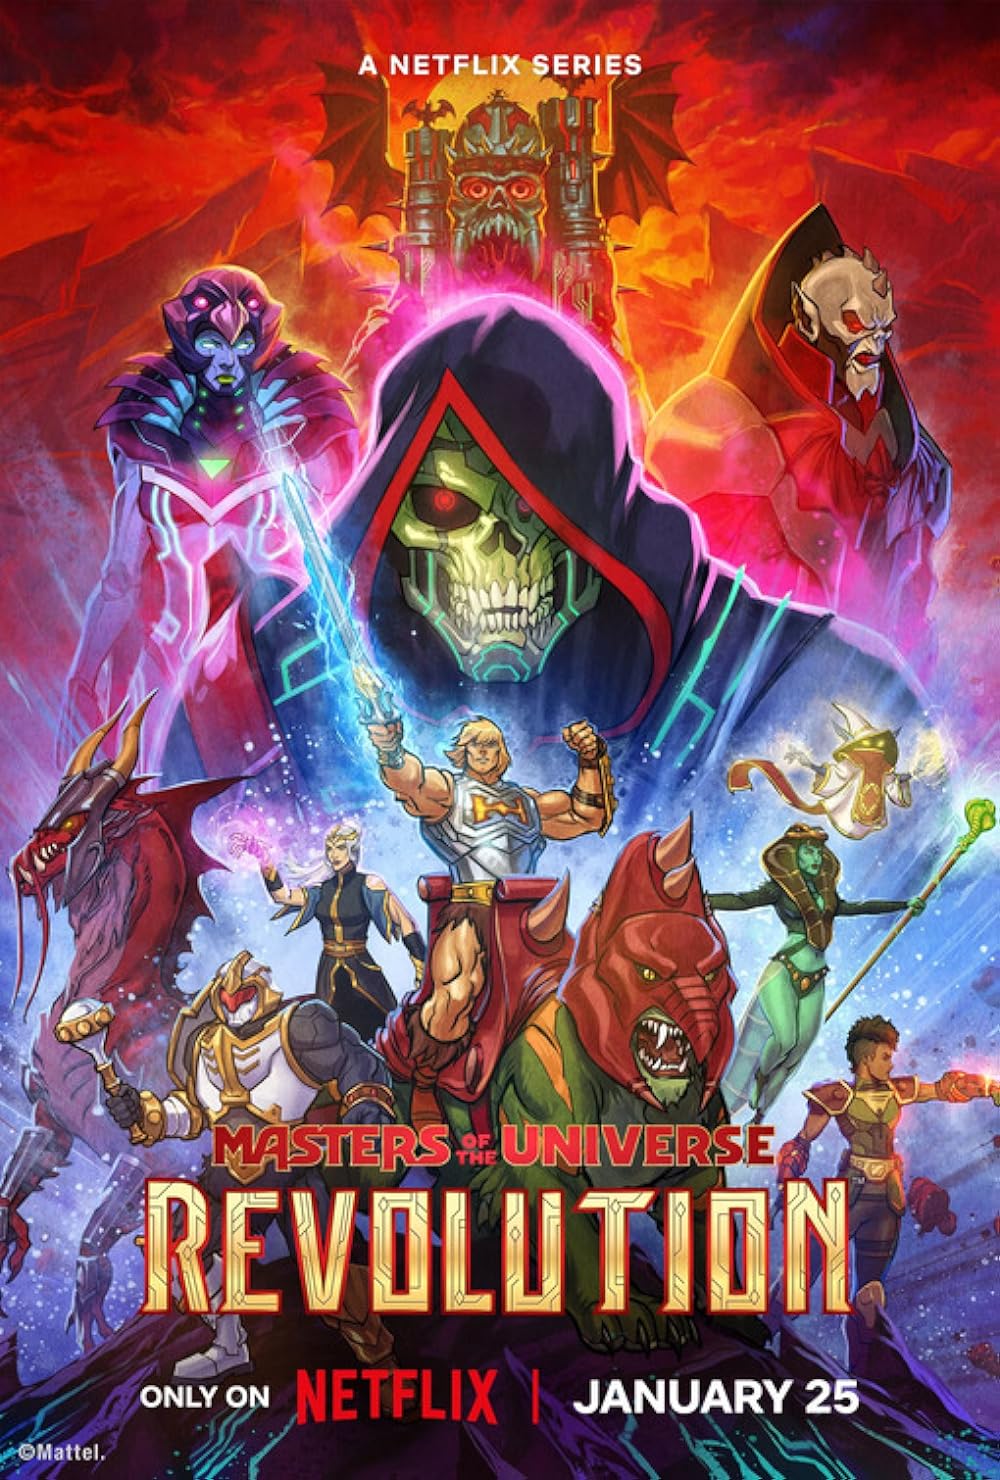 Masters of the Universe: Revolution (January 25) - Streaming on NetflixMasters of the Universe: Revolution is a follow-up series to 2021’s Masters of the Universe: Revelation. This enthralling new chapter in the He-Man saga expands upon his epic rivalry with Skeletor. Set in the fantastical world of Eternia, the story brings a fresh perspective to their classic conflict, focusing on a clash between technology and magic. As He-Man and his allies face Skeletor, they also confront a mysterious and deadly threat to their planet.